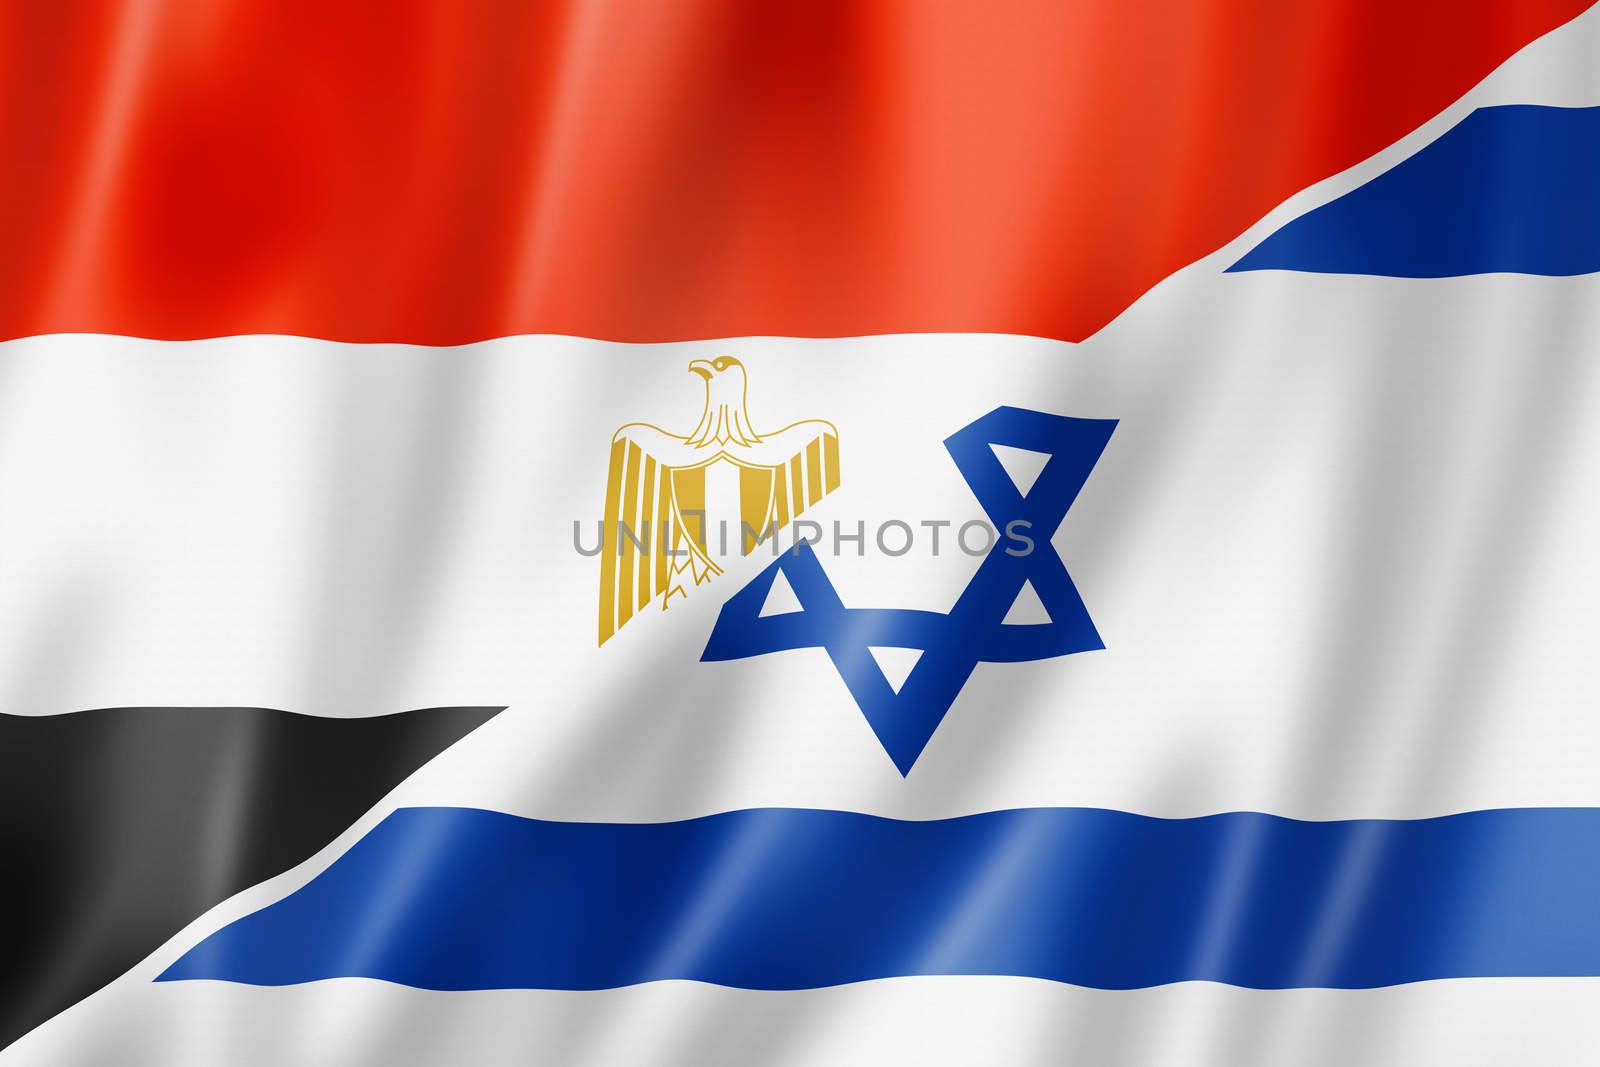 Egypt and Israel flag by daboost